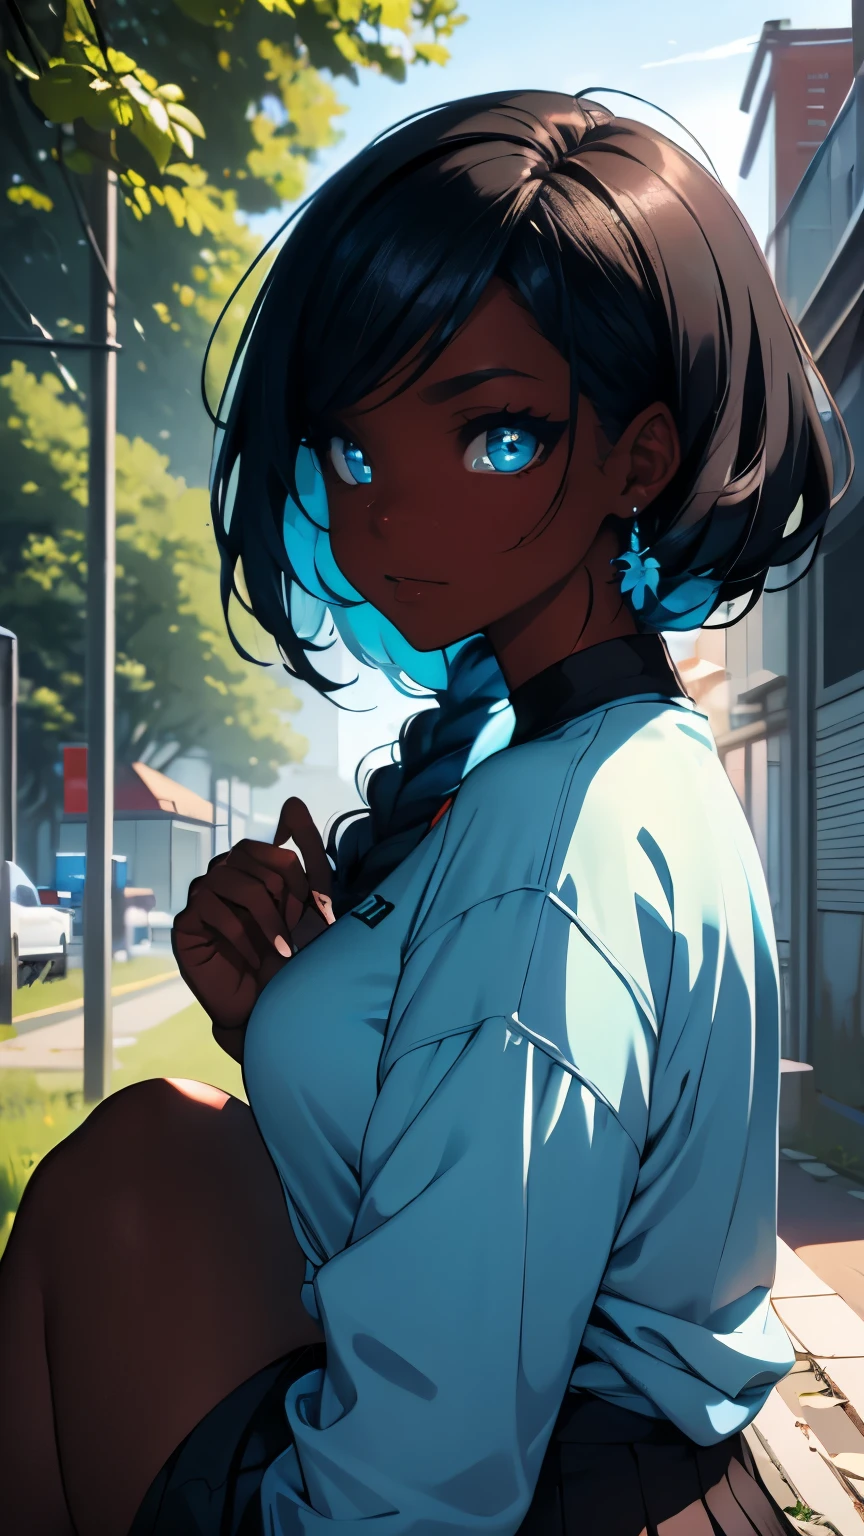 Pretty black woman sitting on a hillside, soft hair, funkypop, cyberdelic, grunge, hyperrealistic anime, lofi art, luminism, manga, medium shot, chemiluminescence, flare, flourescent lightin, character design, atey ghailan, basquiat, colorful_frequencies, electric colors, iridescent, dynamic pose, nouveau realisme, city background, african american, casual clothes 